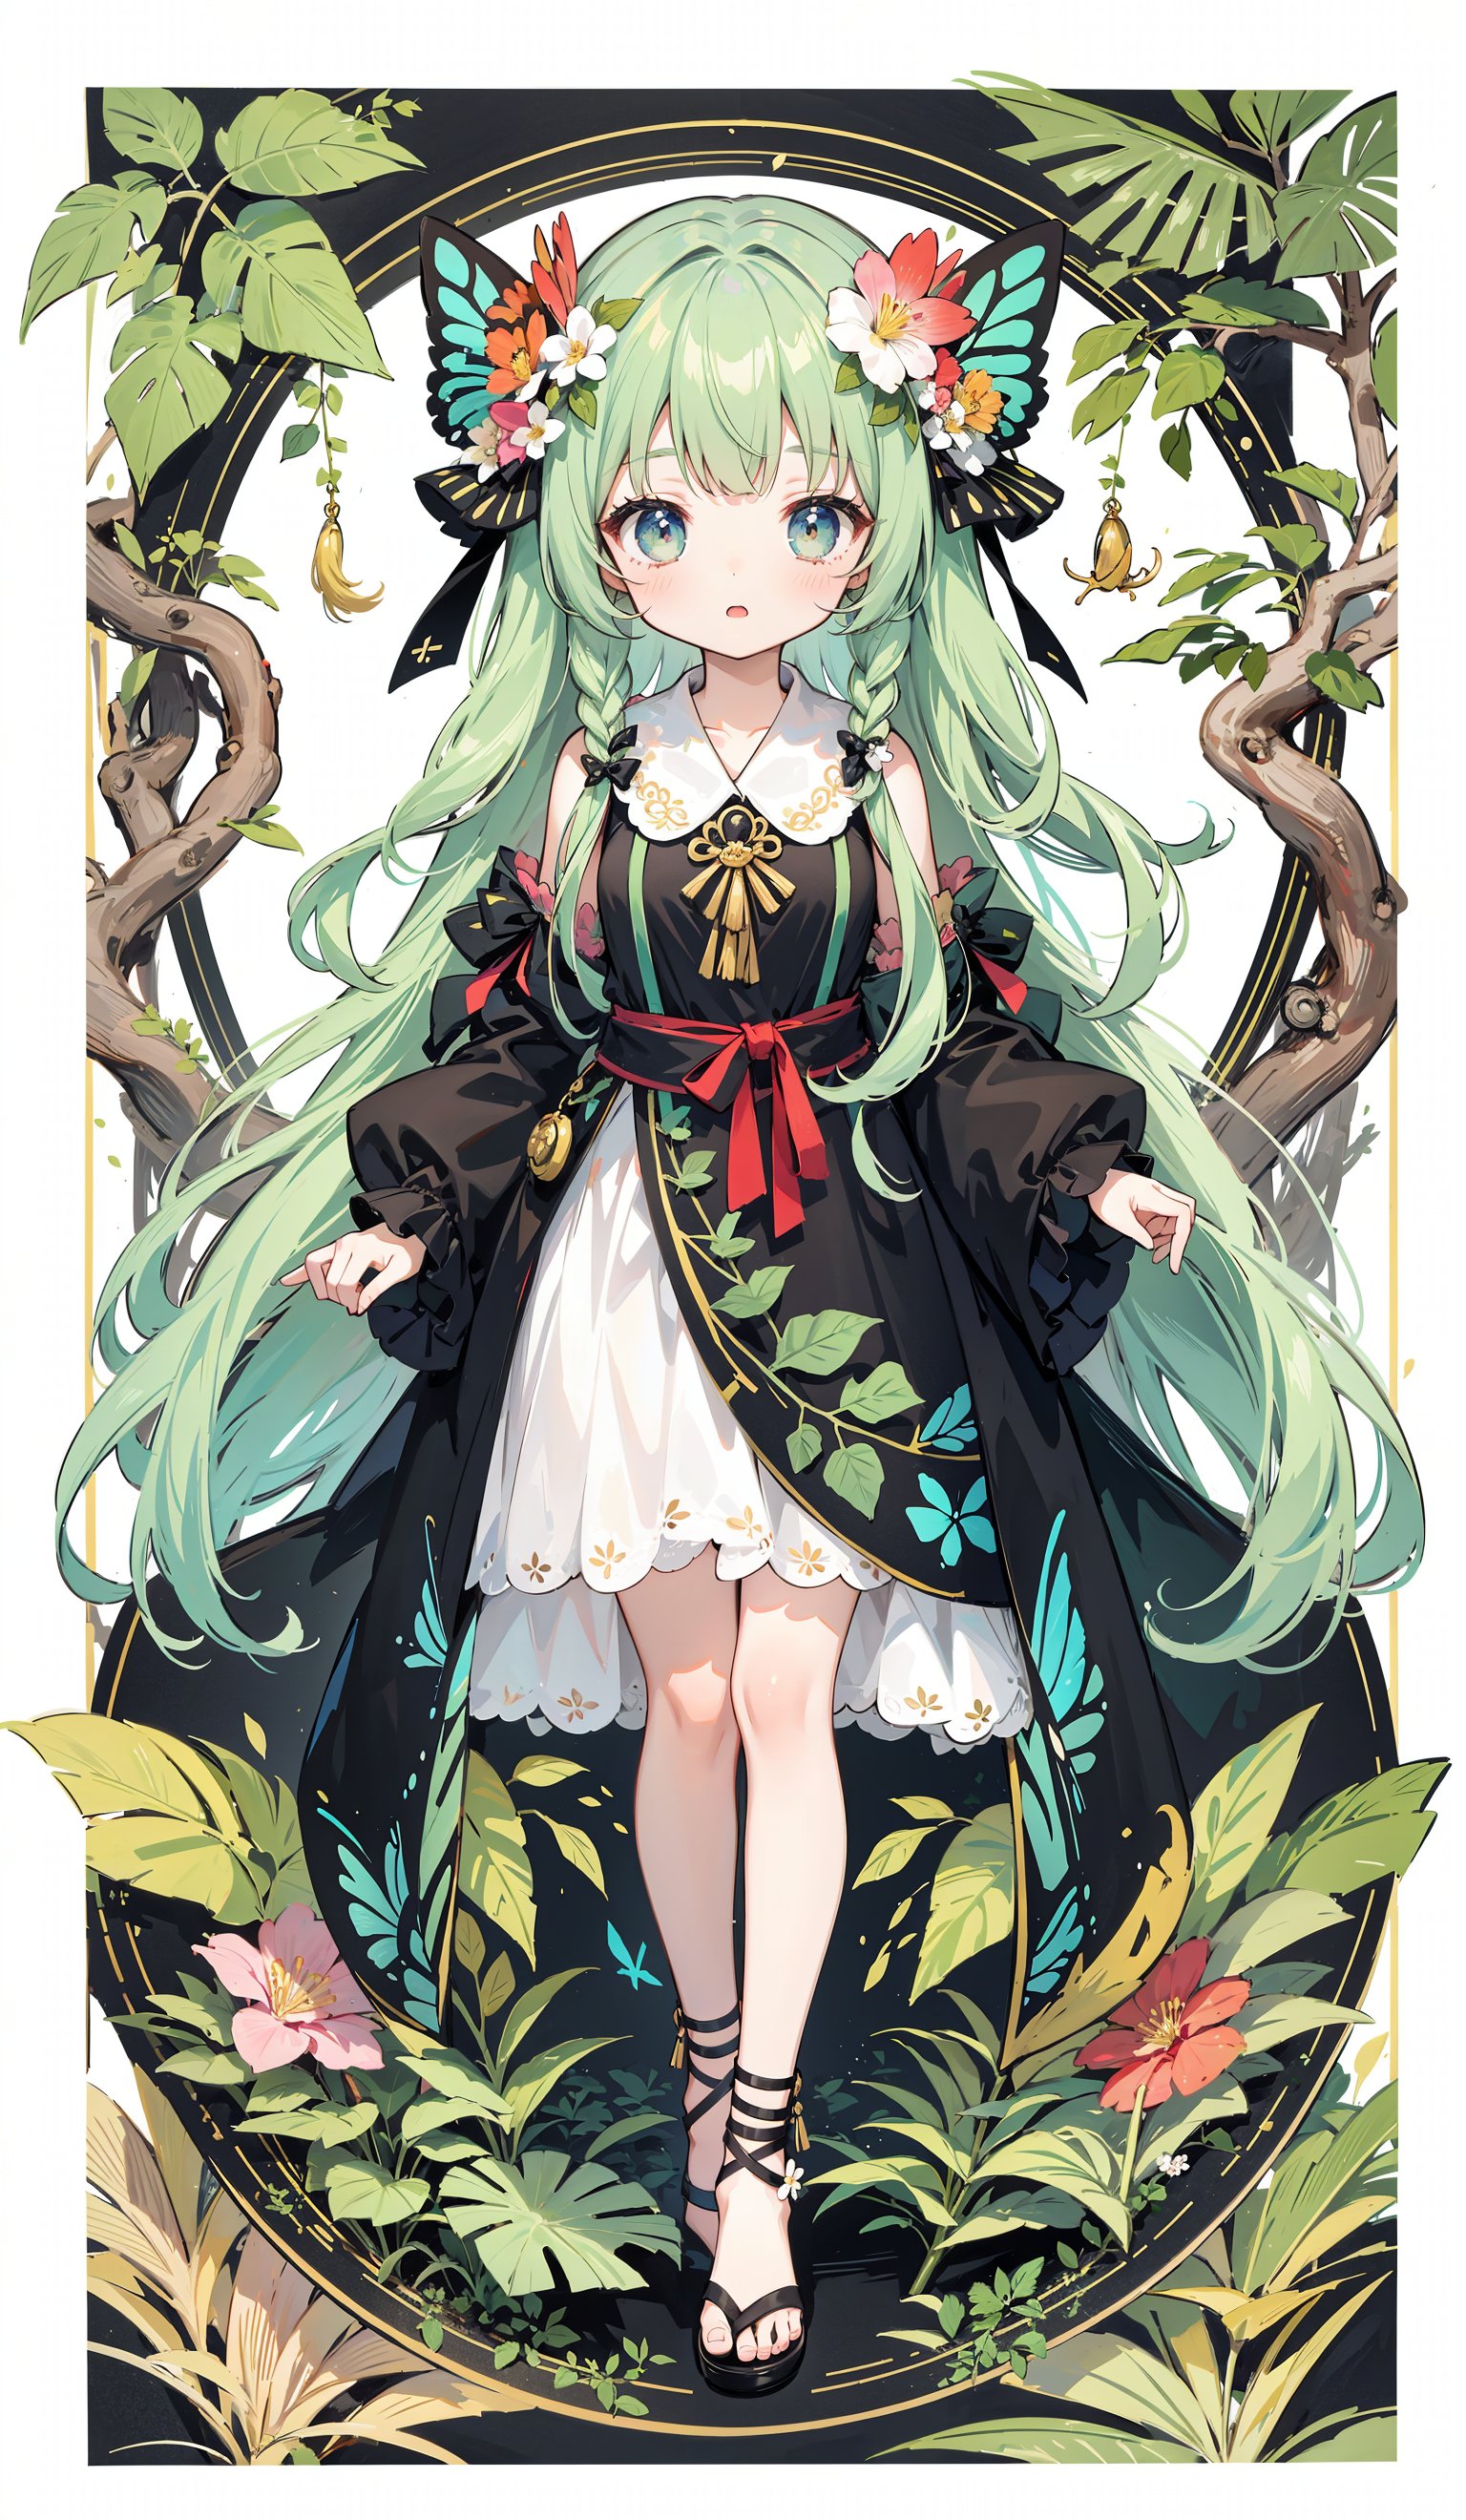  1 girl, surrounded by big leaf plants, wearing flower accessories, (Old-growth forest), (long hair) puberty, young girl, bright outline,Butterfly Dance, chibi, surrealistic,tuyawang, senlin